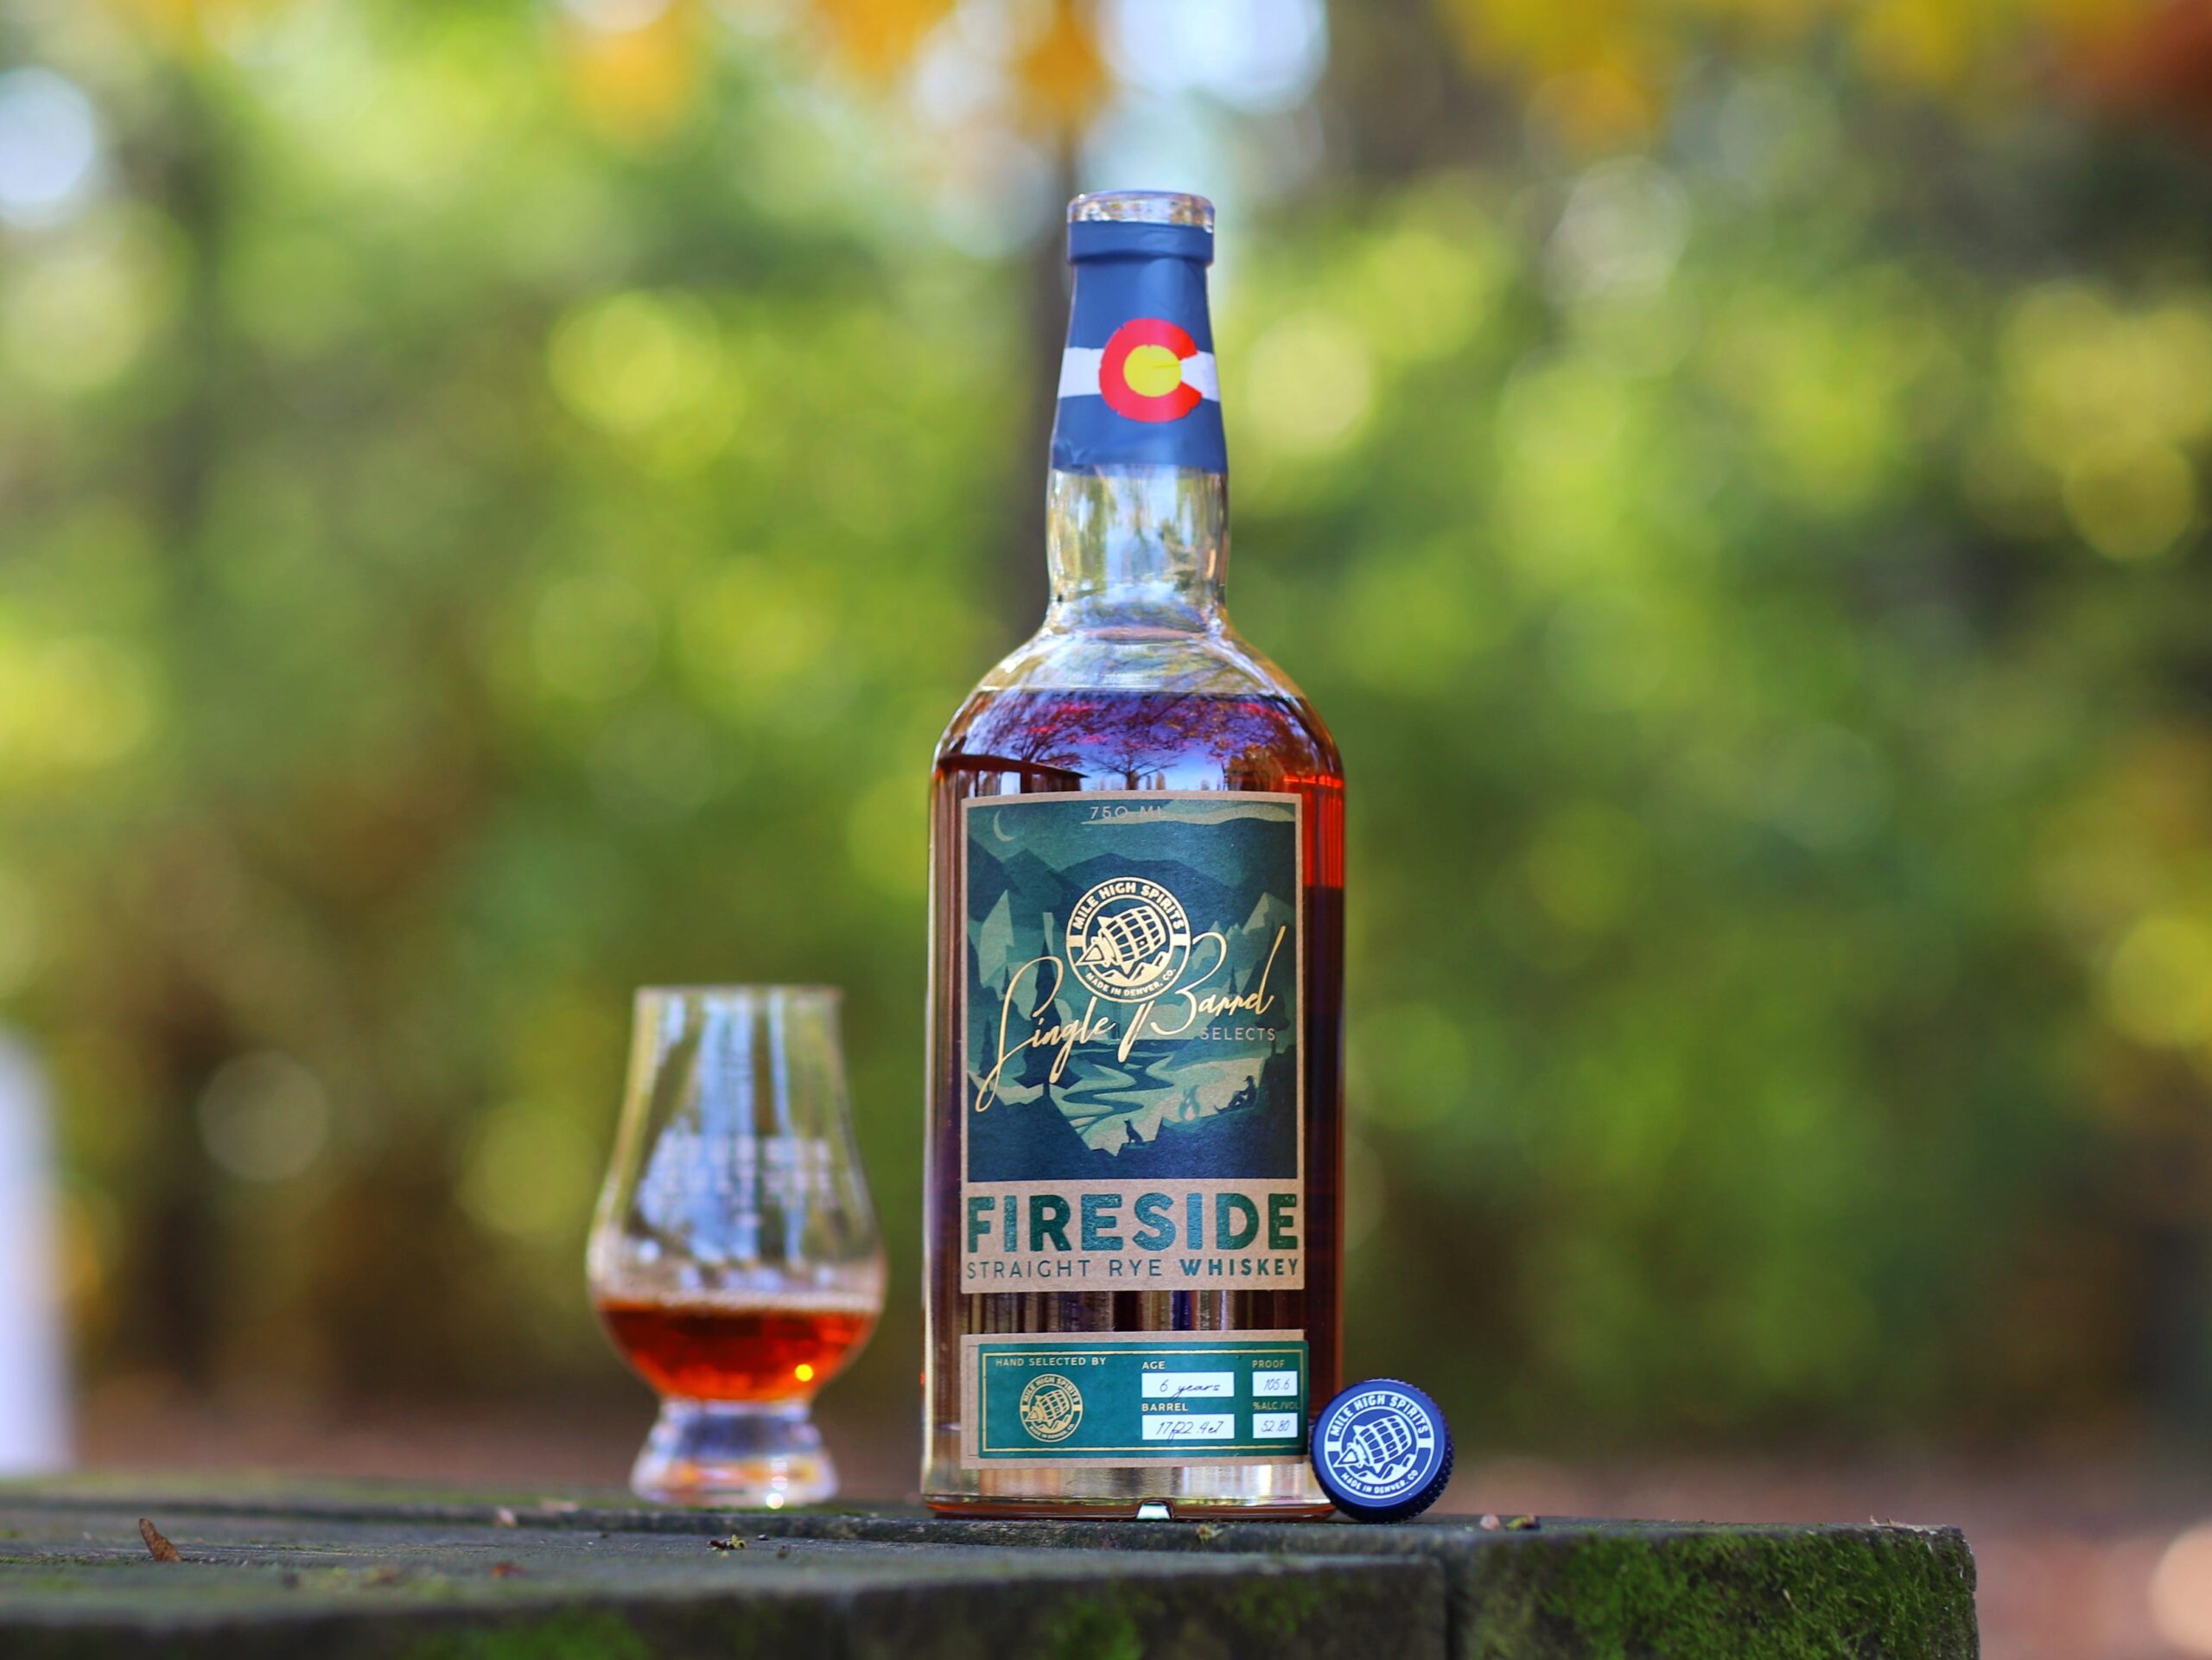 Mile High Spirits Fireside Single Barrel Rye Whiskey (6 Years Old) Review